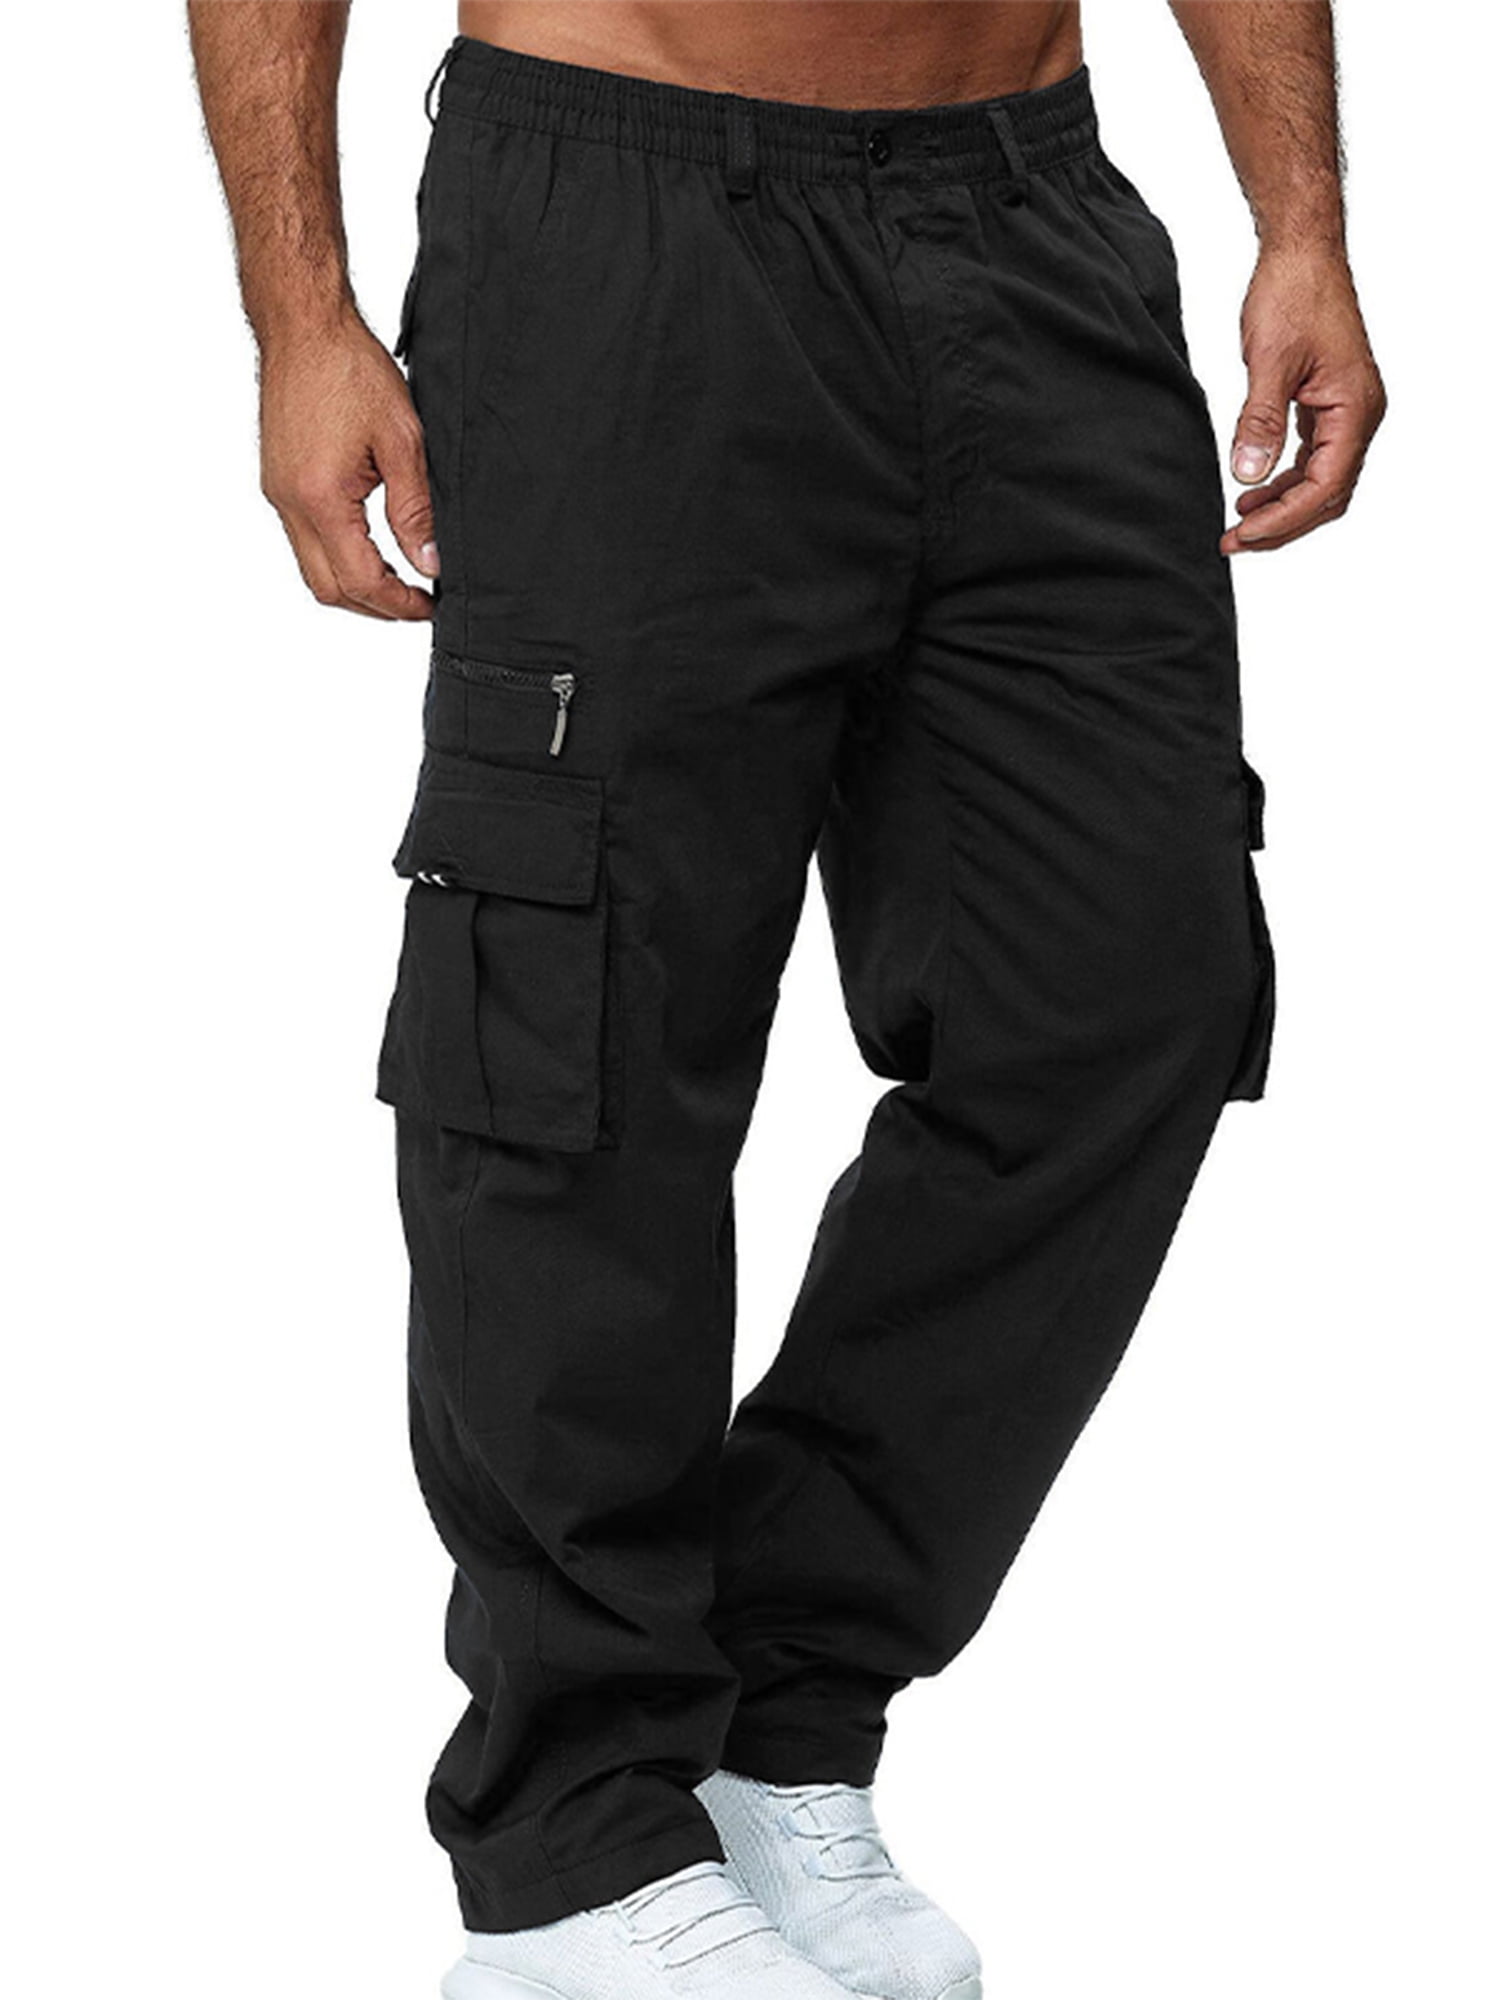 Mens Fashionable Long Cargo Pants Baggy Bershka Cargo Trousers With Fitted  Bottoms For Streetwear And Hip Hop From Taddllee, $1,055.85 | DHgate.Com